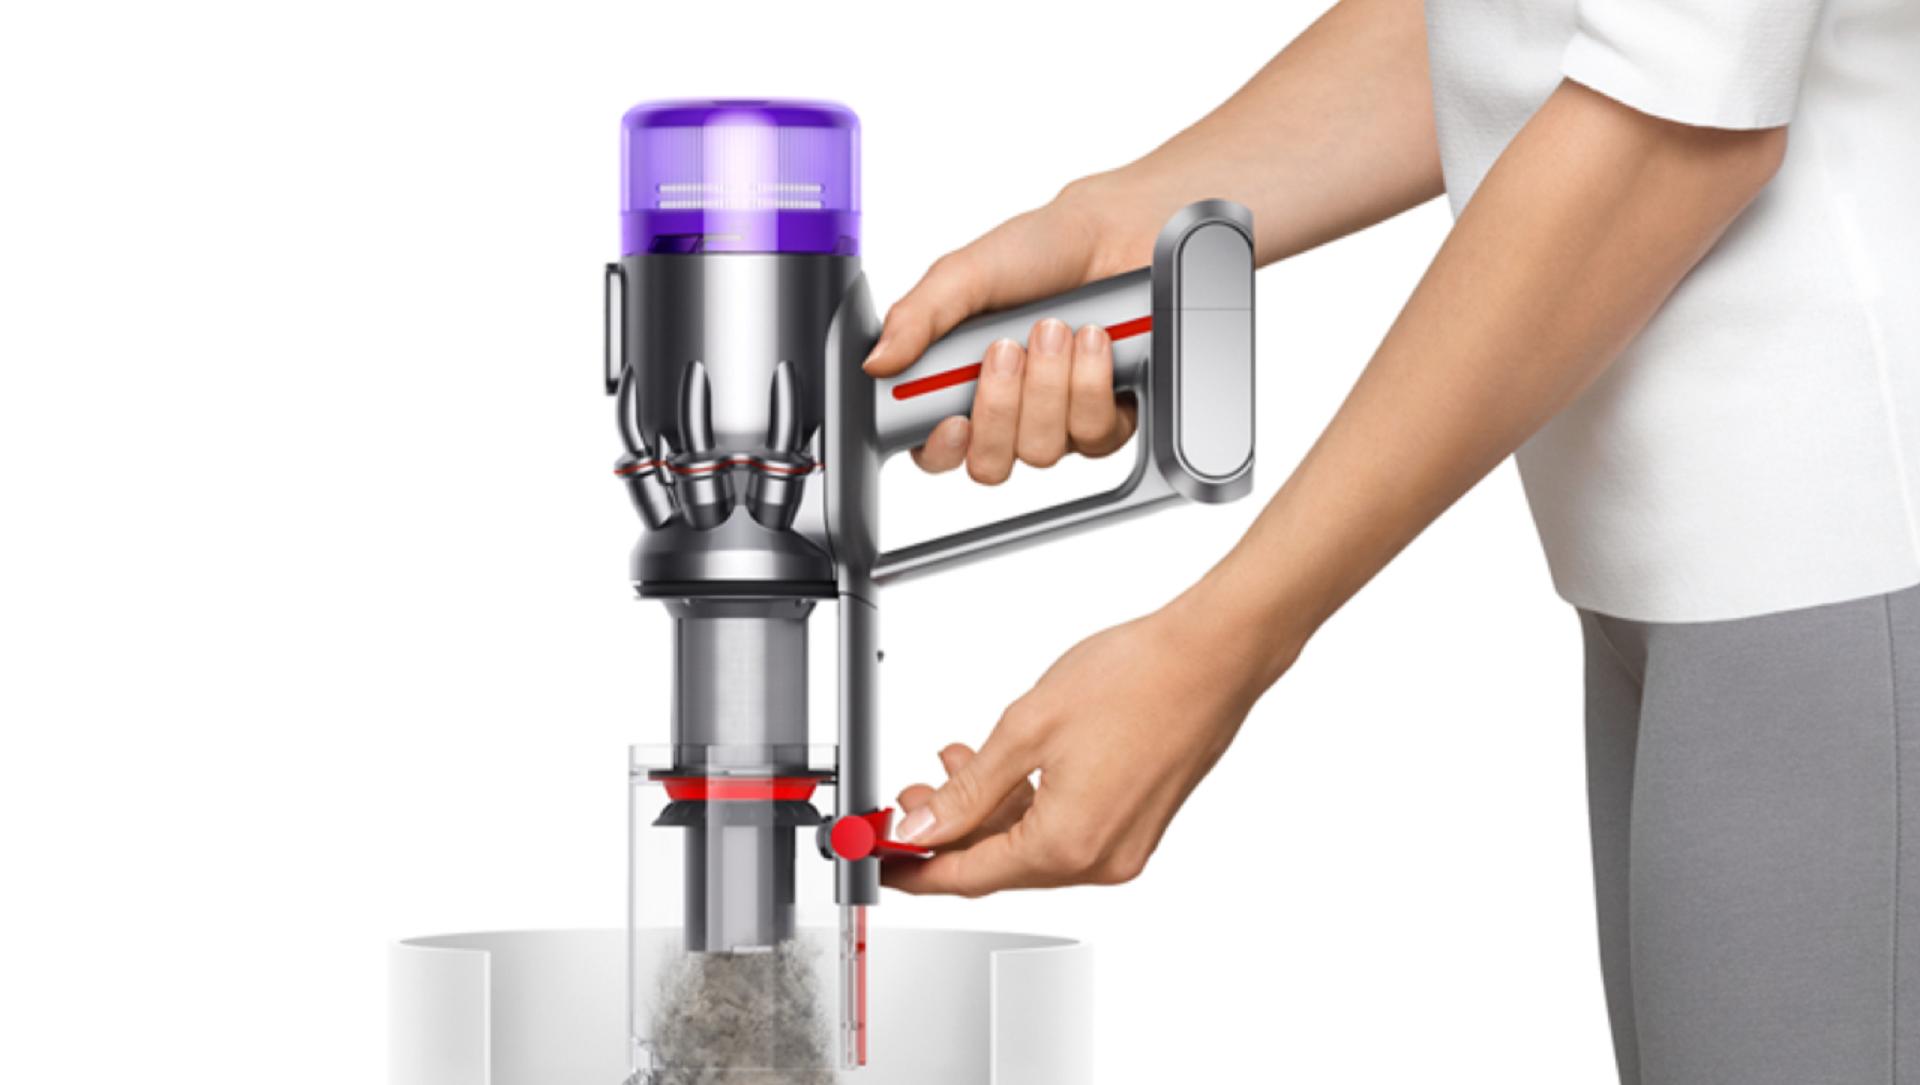 Emptying the bin on the Dyson Micro 1.5kg™ vacuum